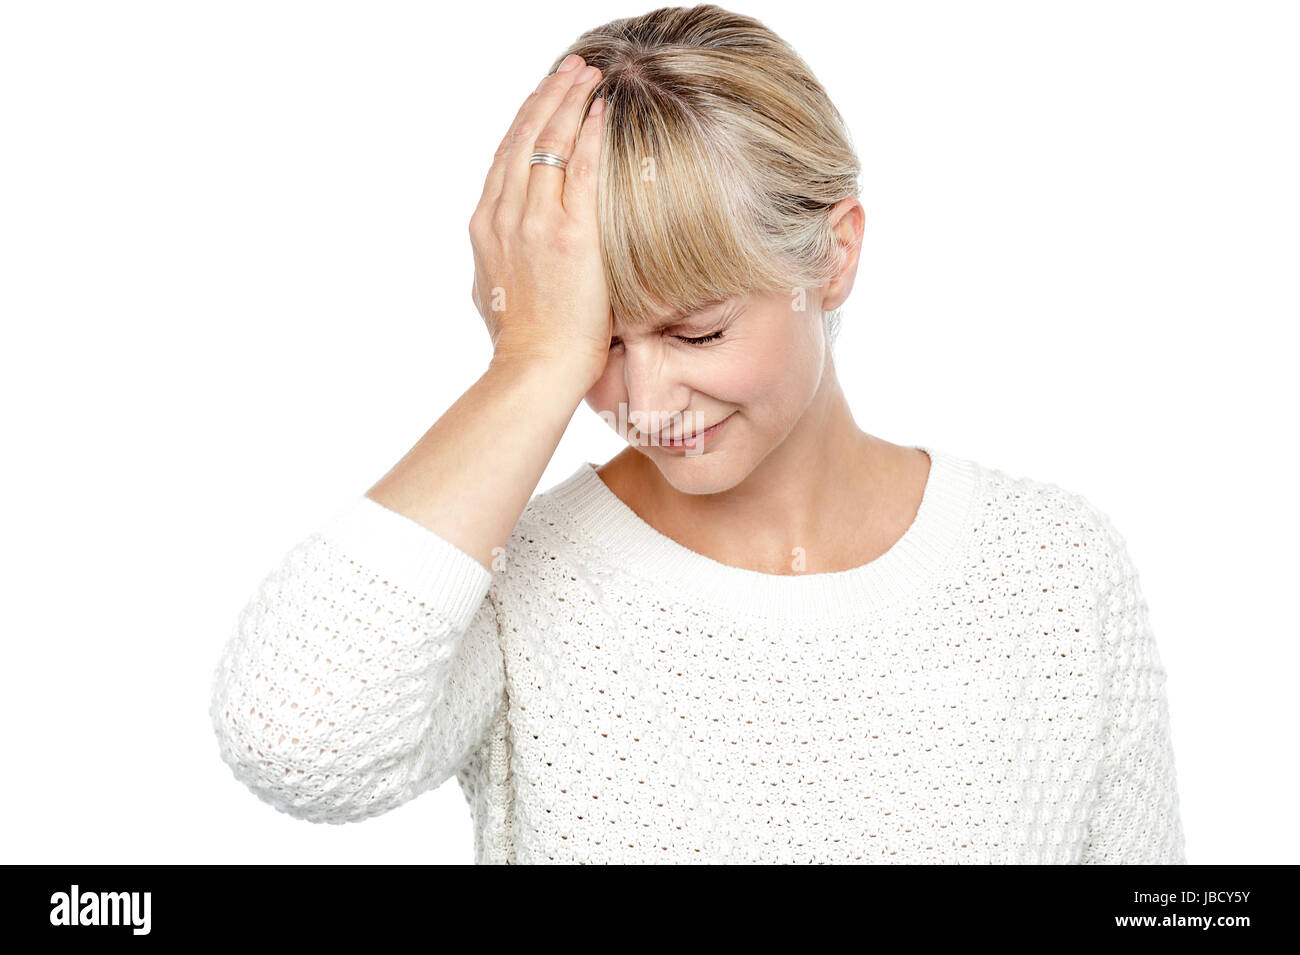 Sad middle aged woman suffering from headache. Placing her hand on forehead. Stock Photo